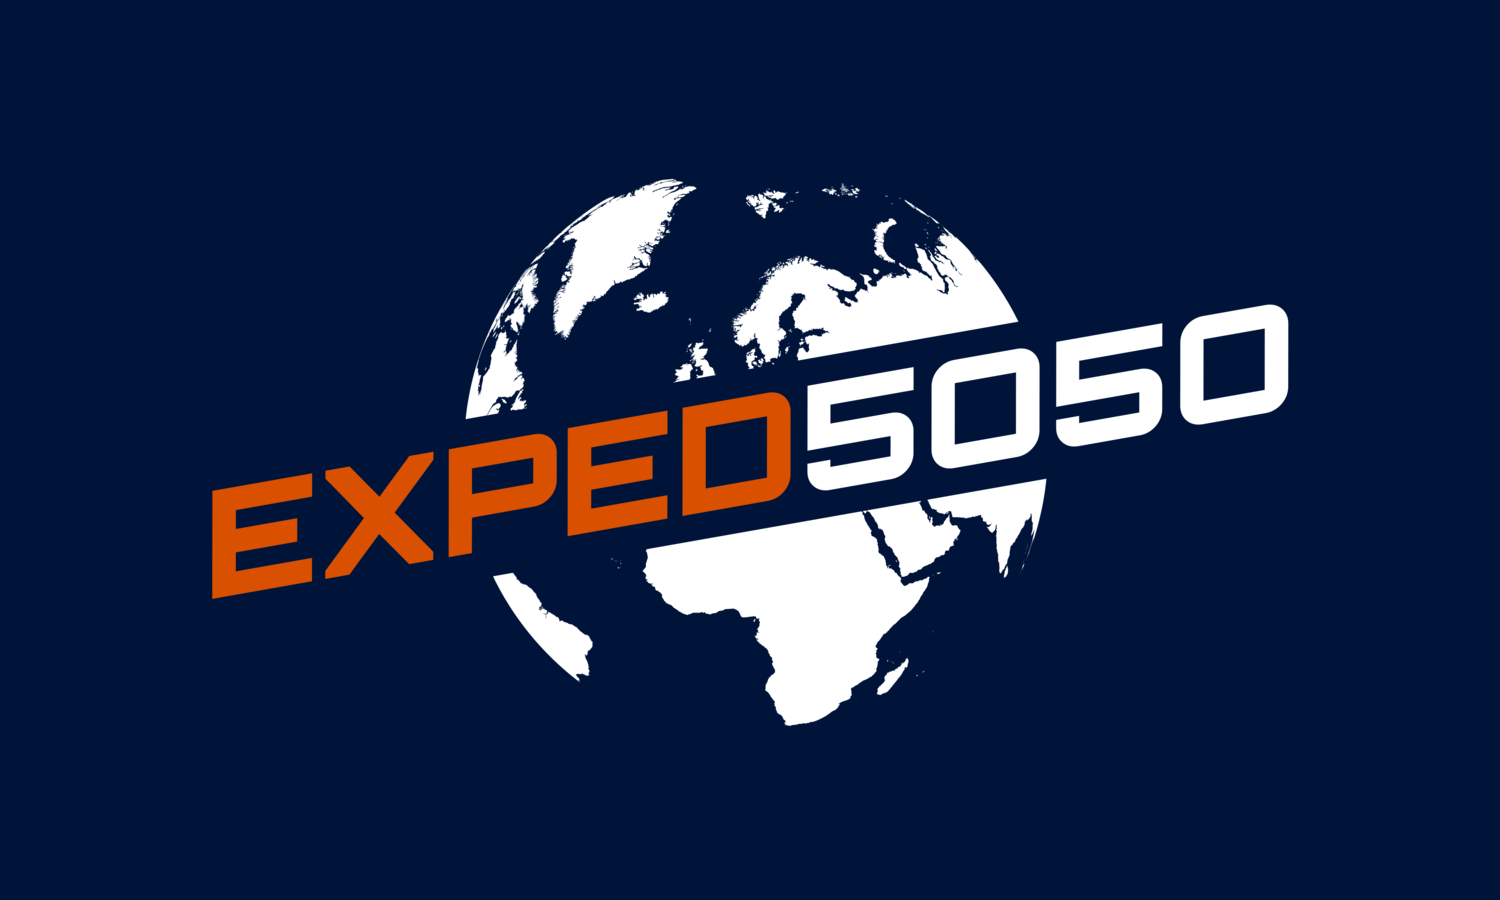 EXPED 5050